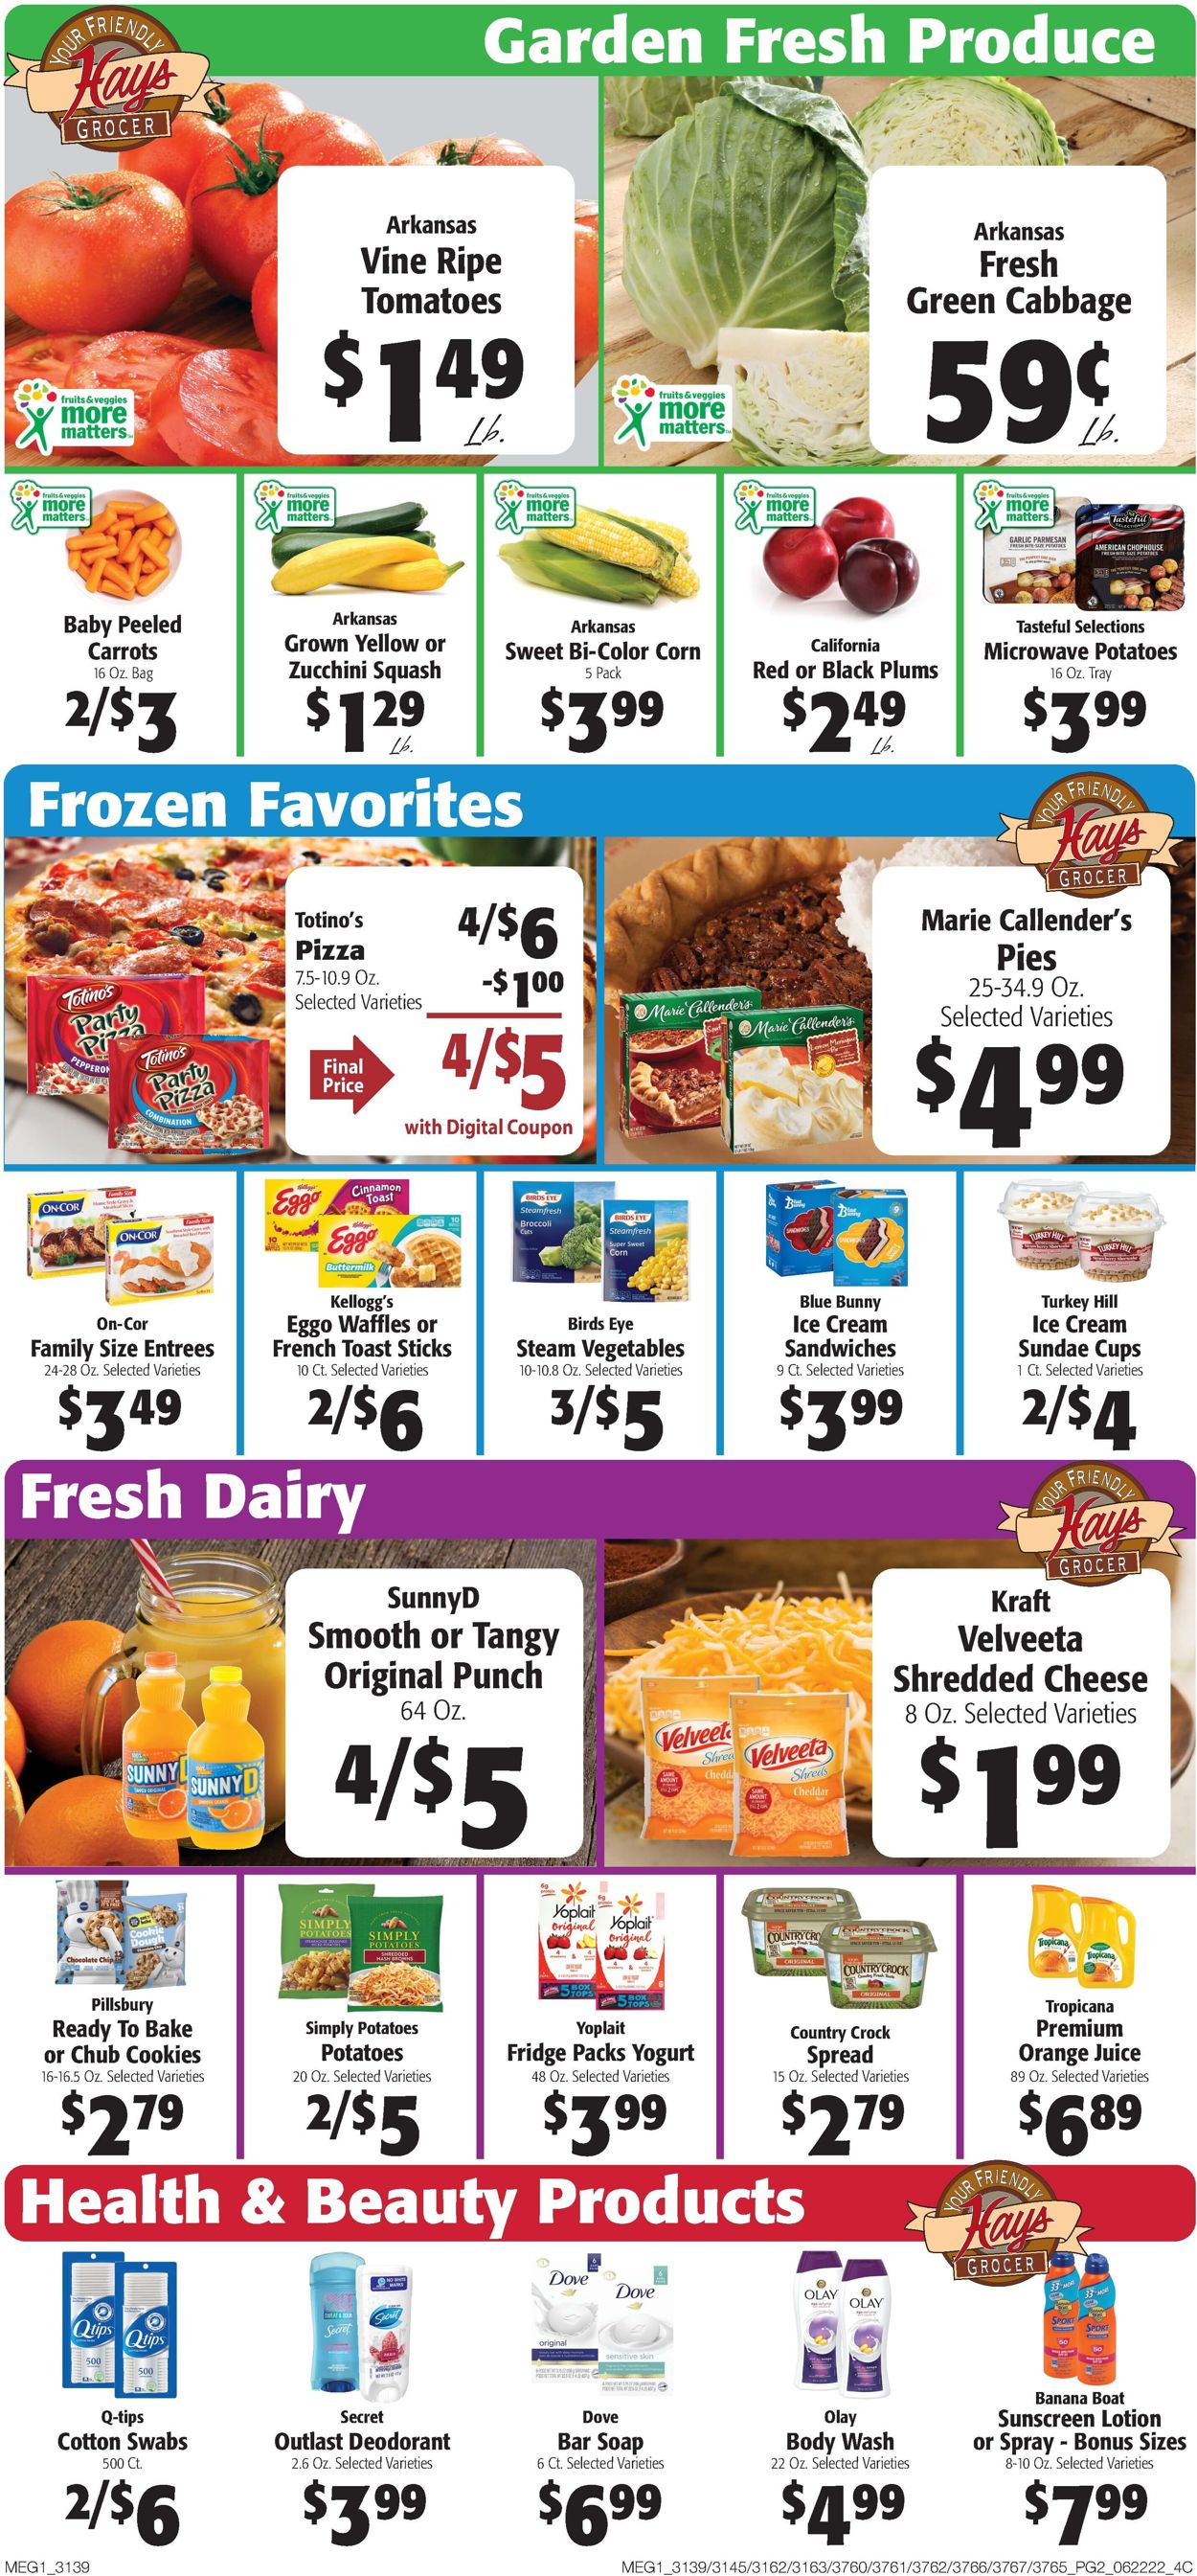 Hays Supermarket Current weekly ad 06/22 - 06/28/2022 [2] - frequent ...